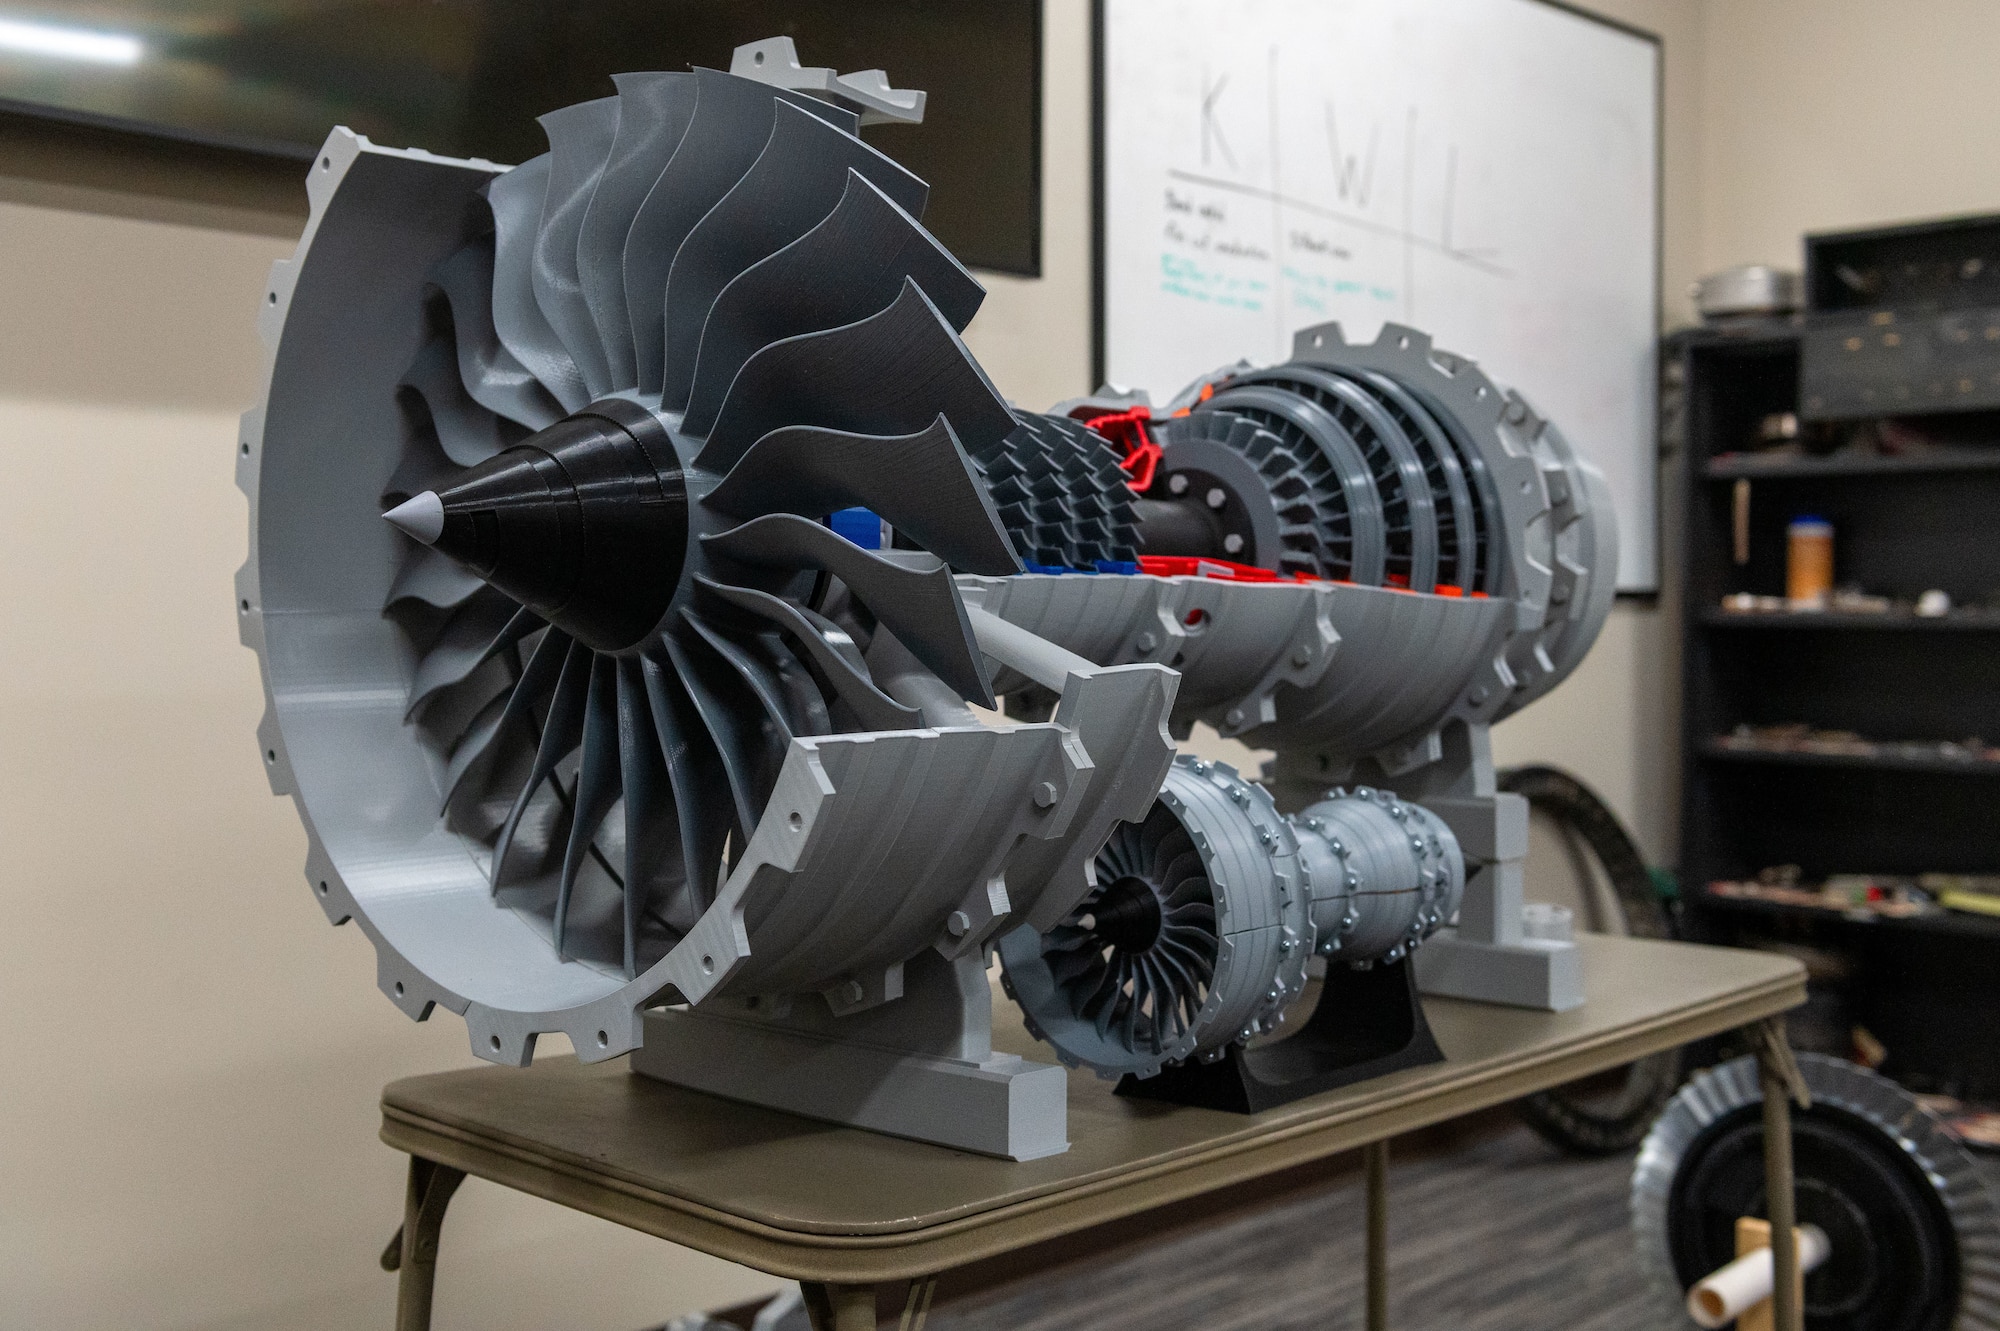 A 3D printed model of a turbofan engine is displayed on a table March 2, 2023, at McConnell Air Force Base, Kansas. The model was created by Tech. Sgt. Shane Wofford, 373rd Training Squadron Detachment 8 propulsion instructor, to bridge a gap he saw in the training curriculum. (U.S. Air Force photo by Airman 1st Class Brenden Beezley)